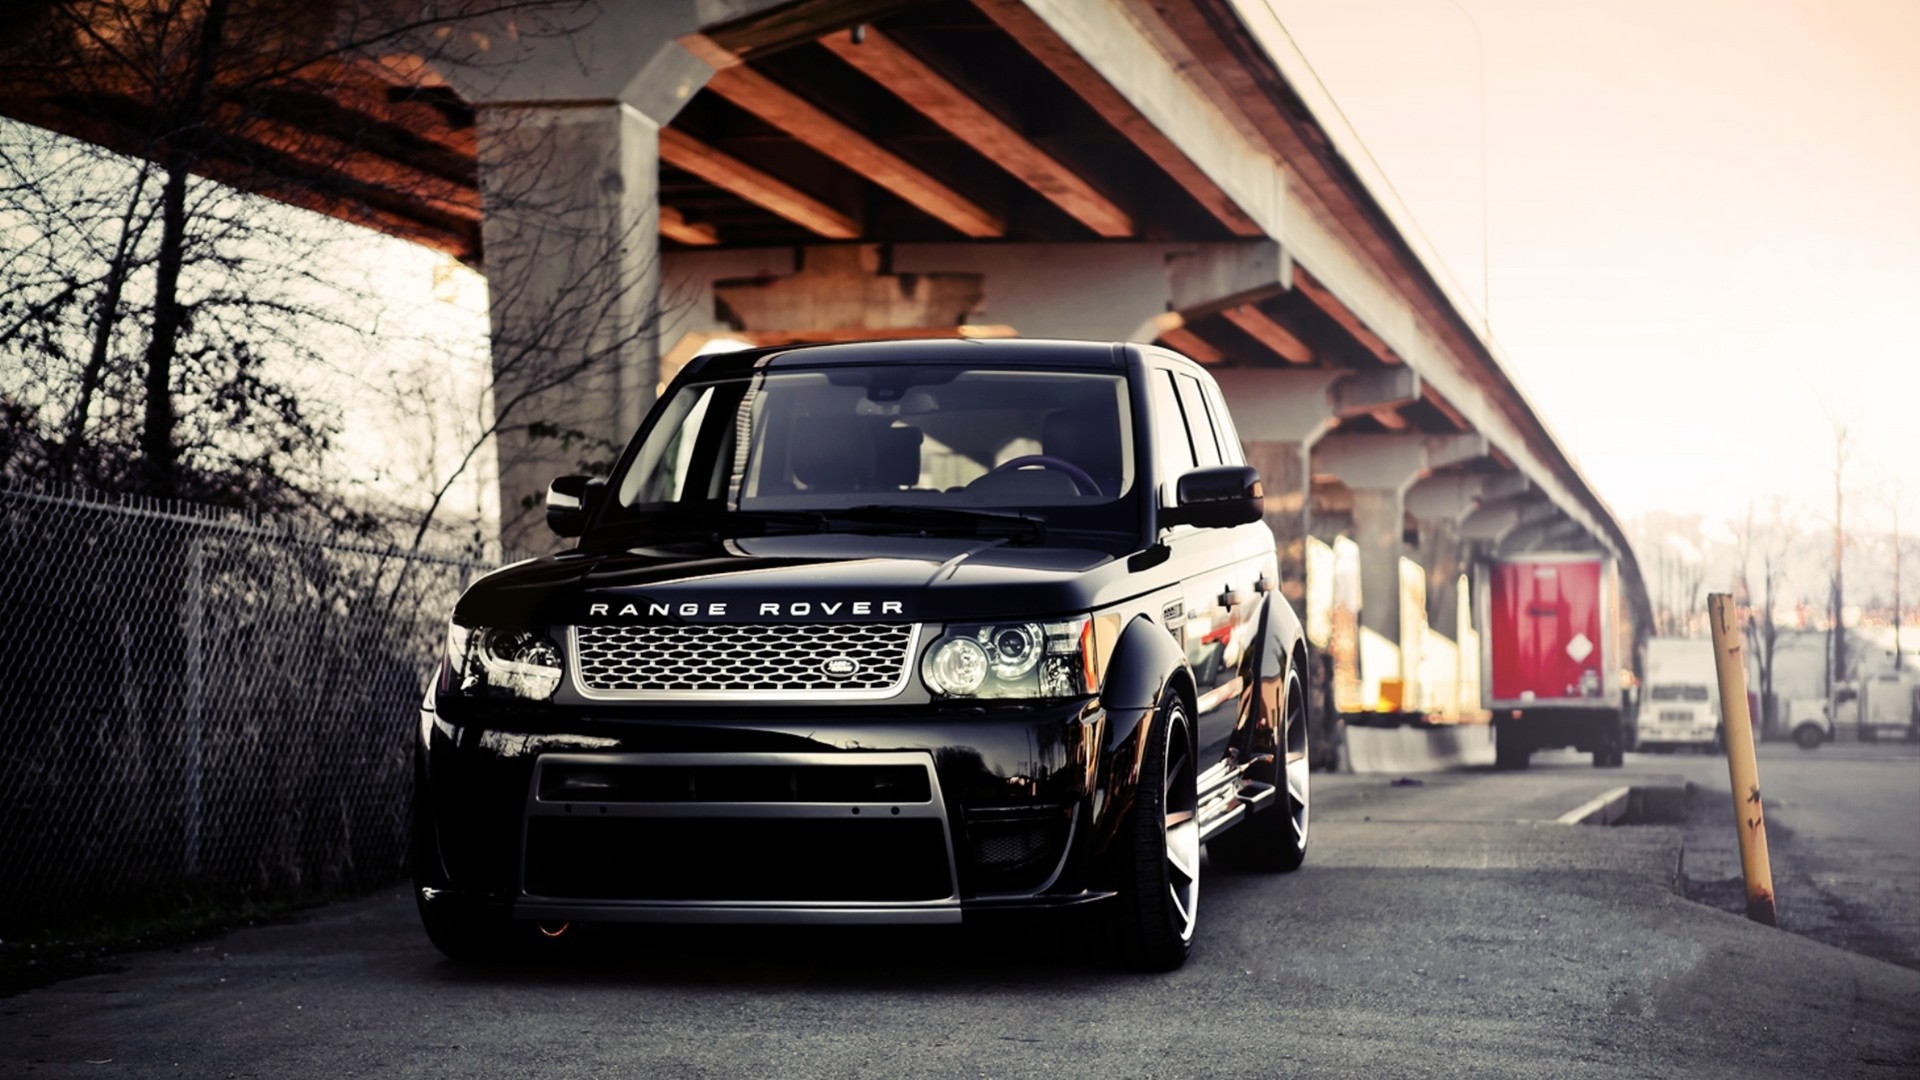 Range Rover Sport Wallpapers HD | Full HD Pictures